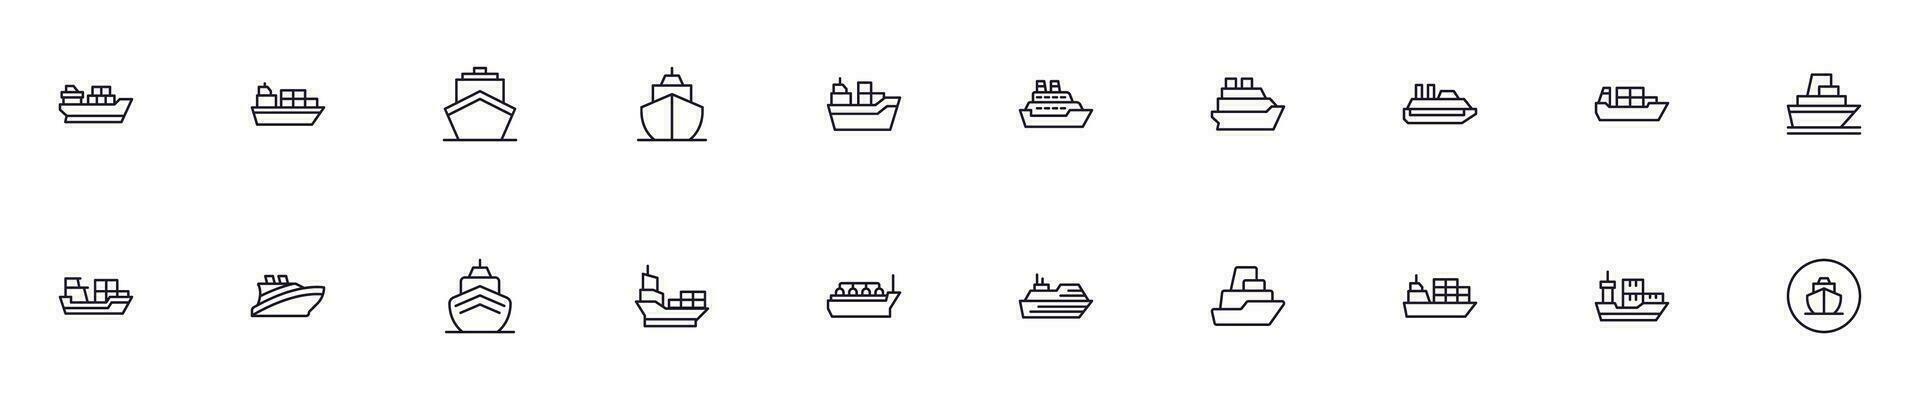 Ship concept. Collection of ship high quality vector outline signs for web pages, books, online stores, flyers, banners etc. Set of premium illustrations isolated on white background